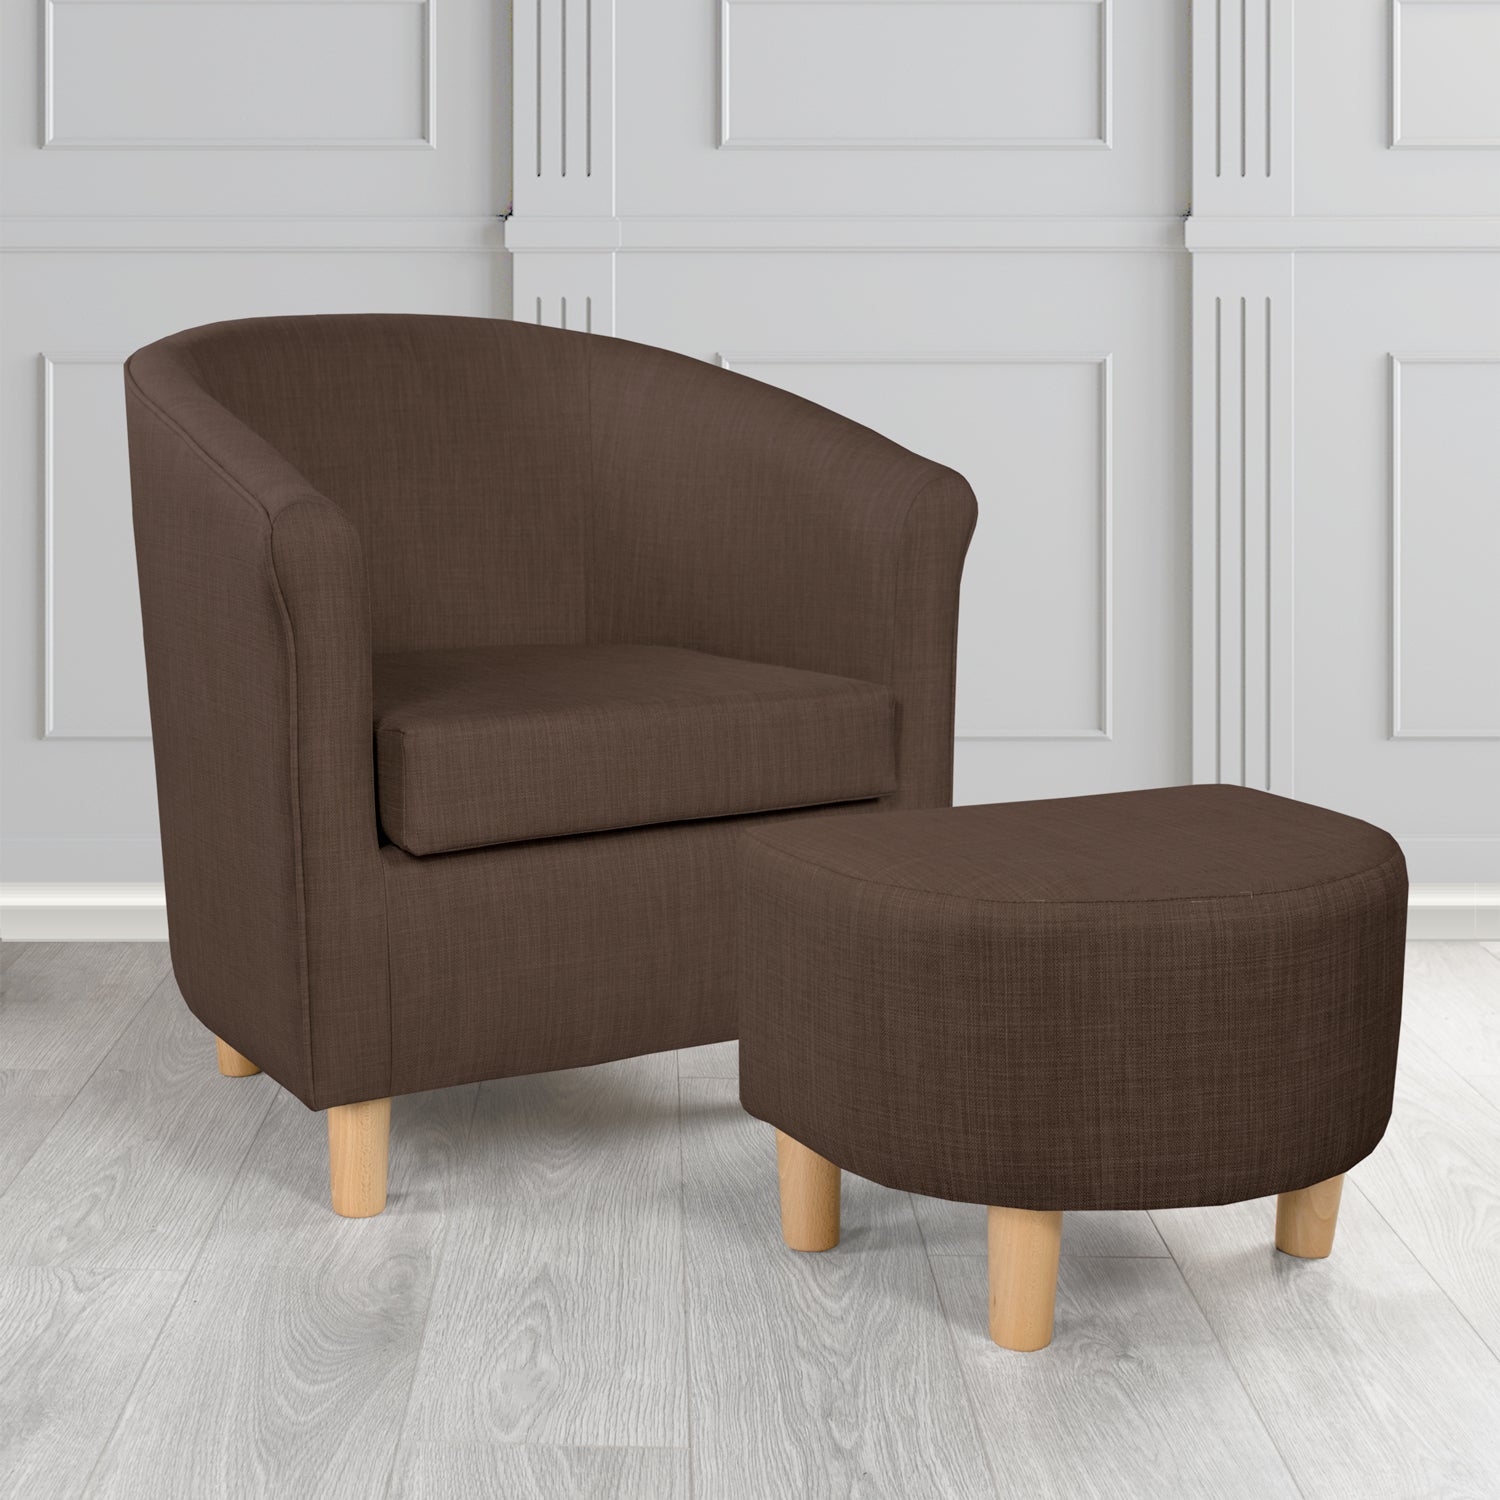 Tuscany Charles Sandalwood Linen Plain Fabric Tub Chair with Dee Footstool Set - The Tub Chair Shop